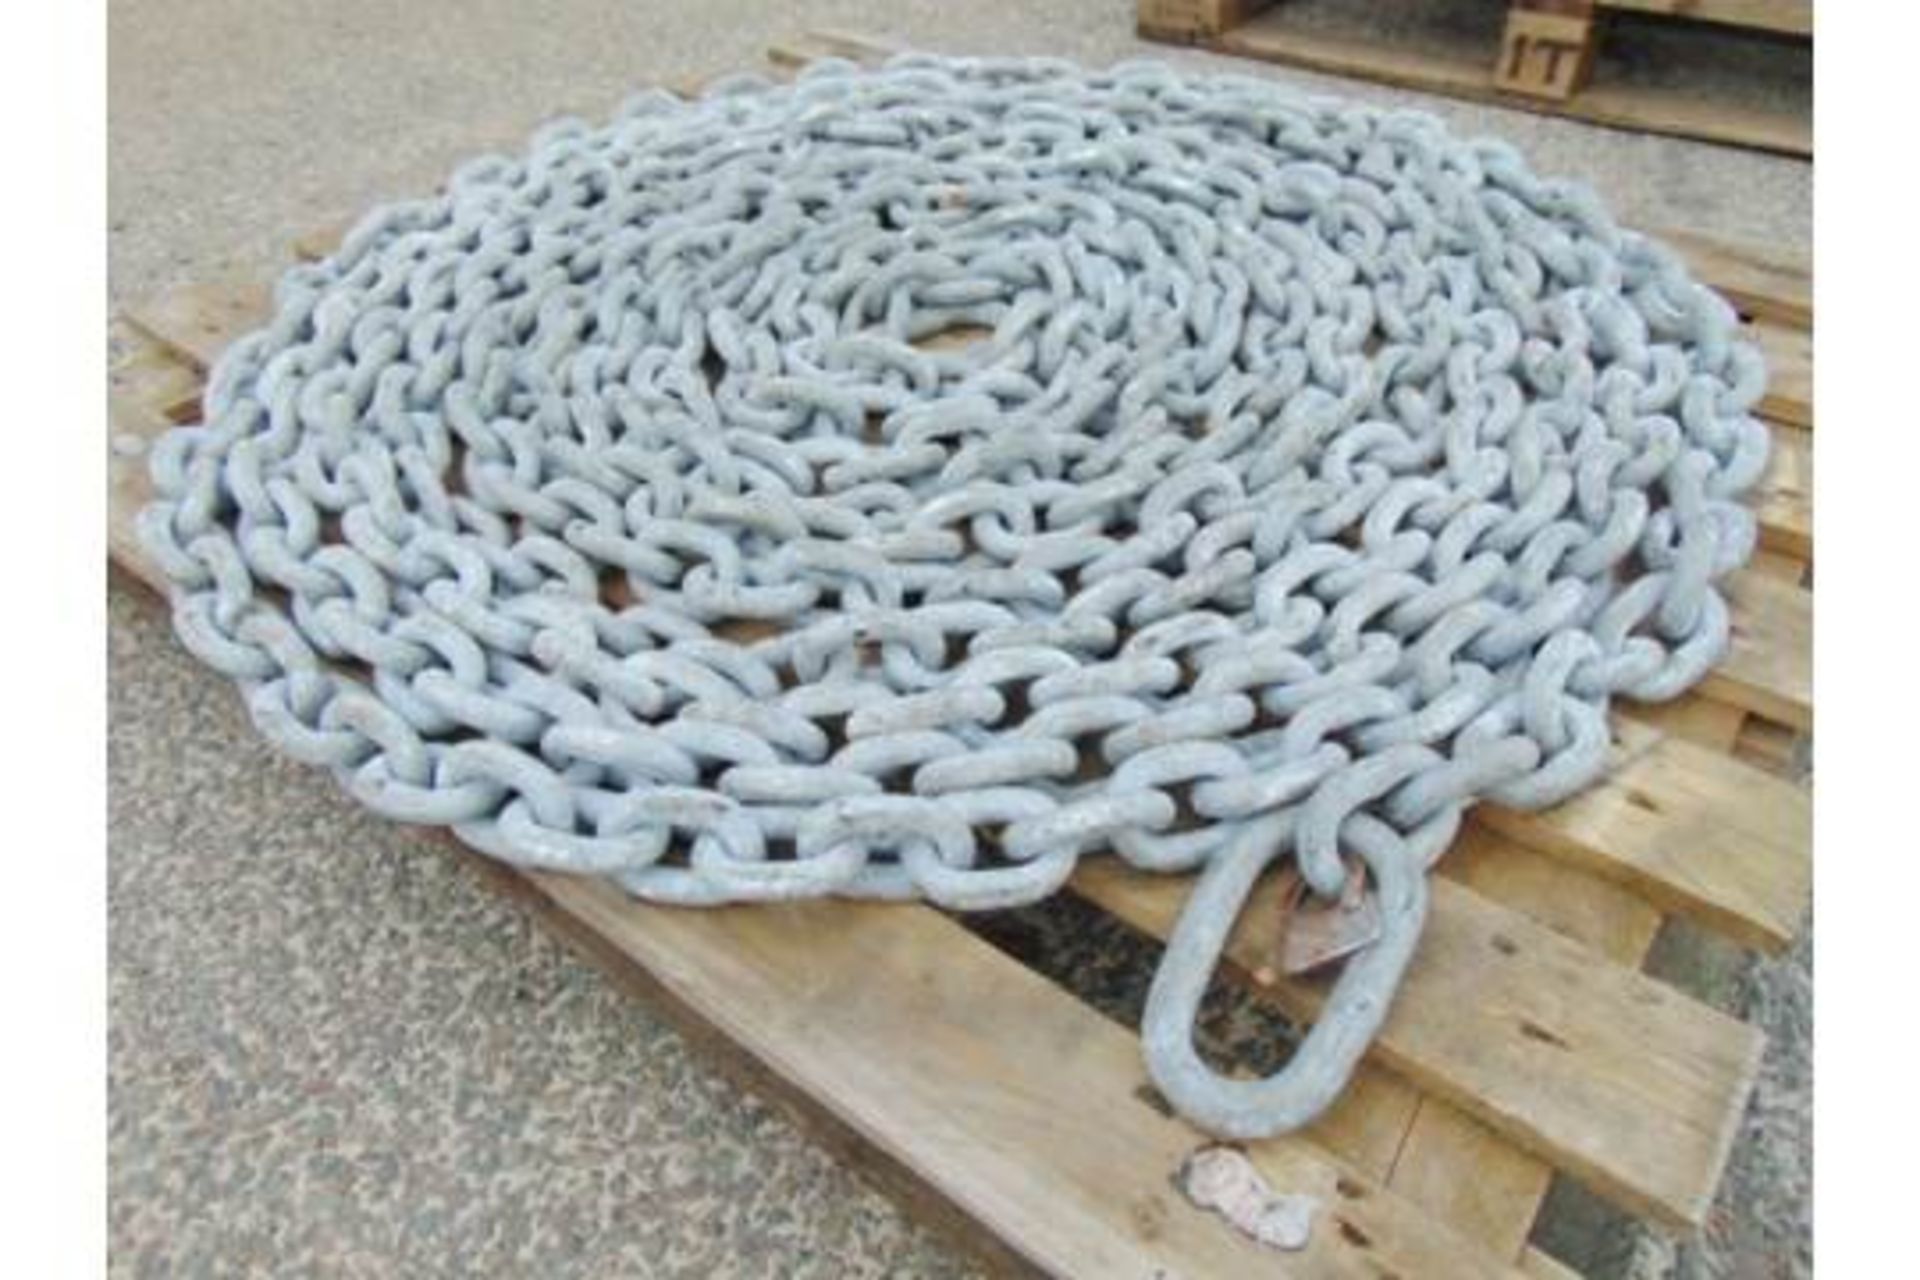 20m Galvanised Mooring Chain Assy. This would be ideal for light ships etc